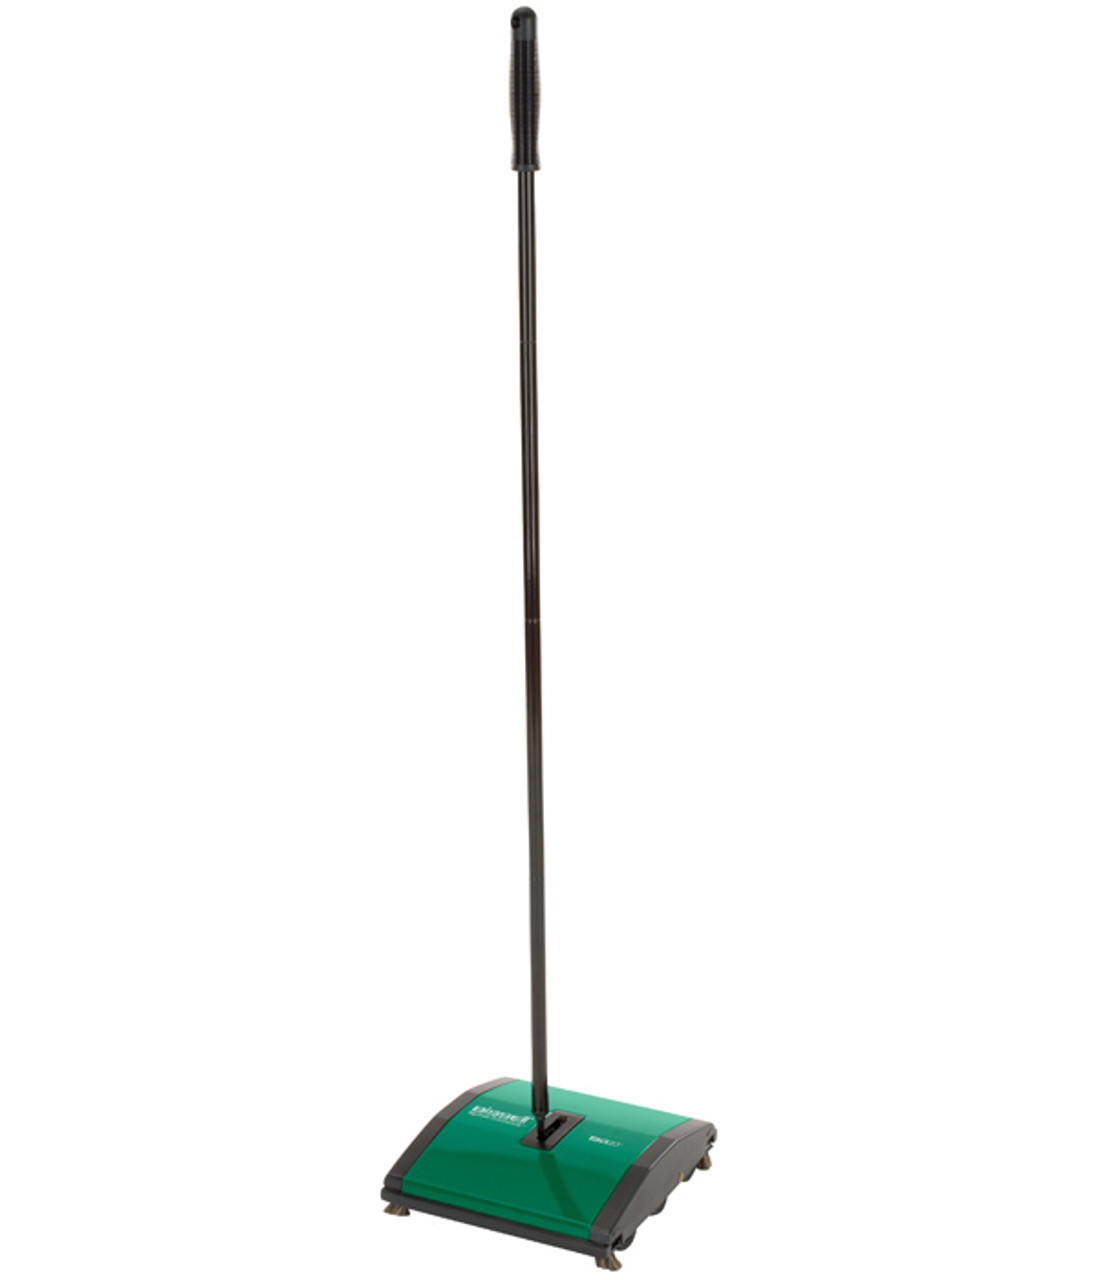 The Bissell BG23 Carpet and Floor Sweeper is great for low pile carpet and bare floors.